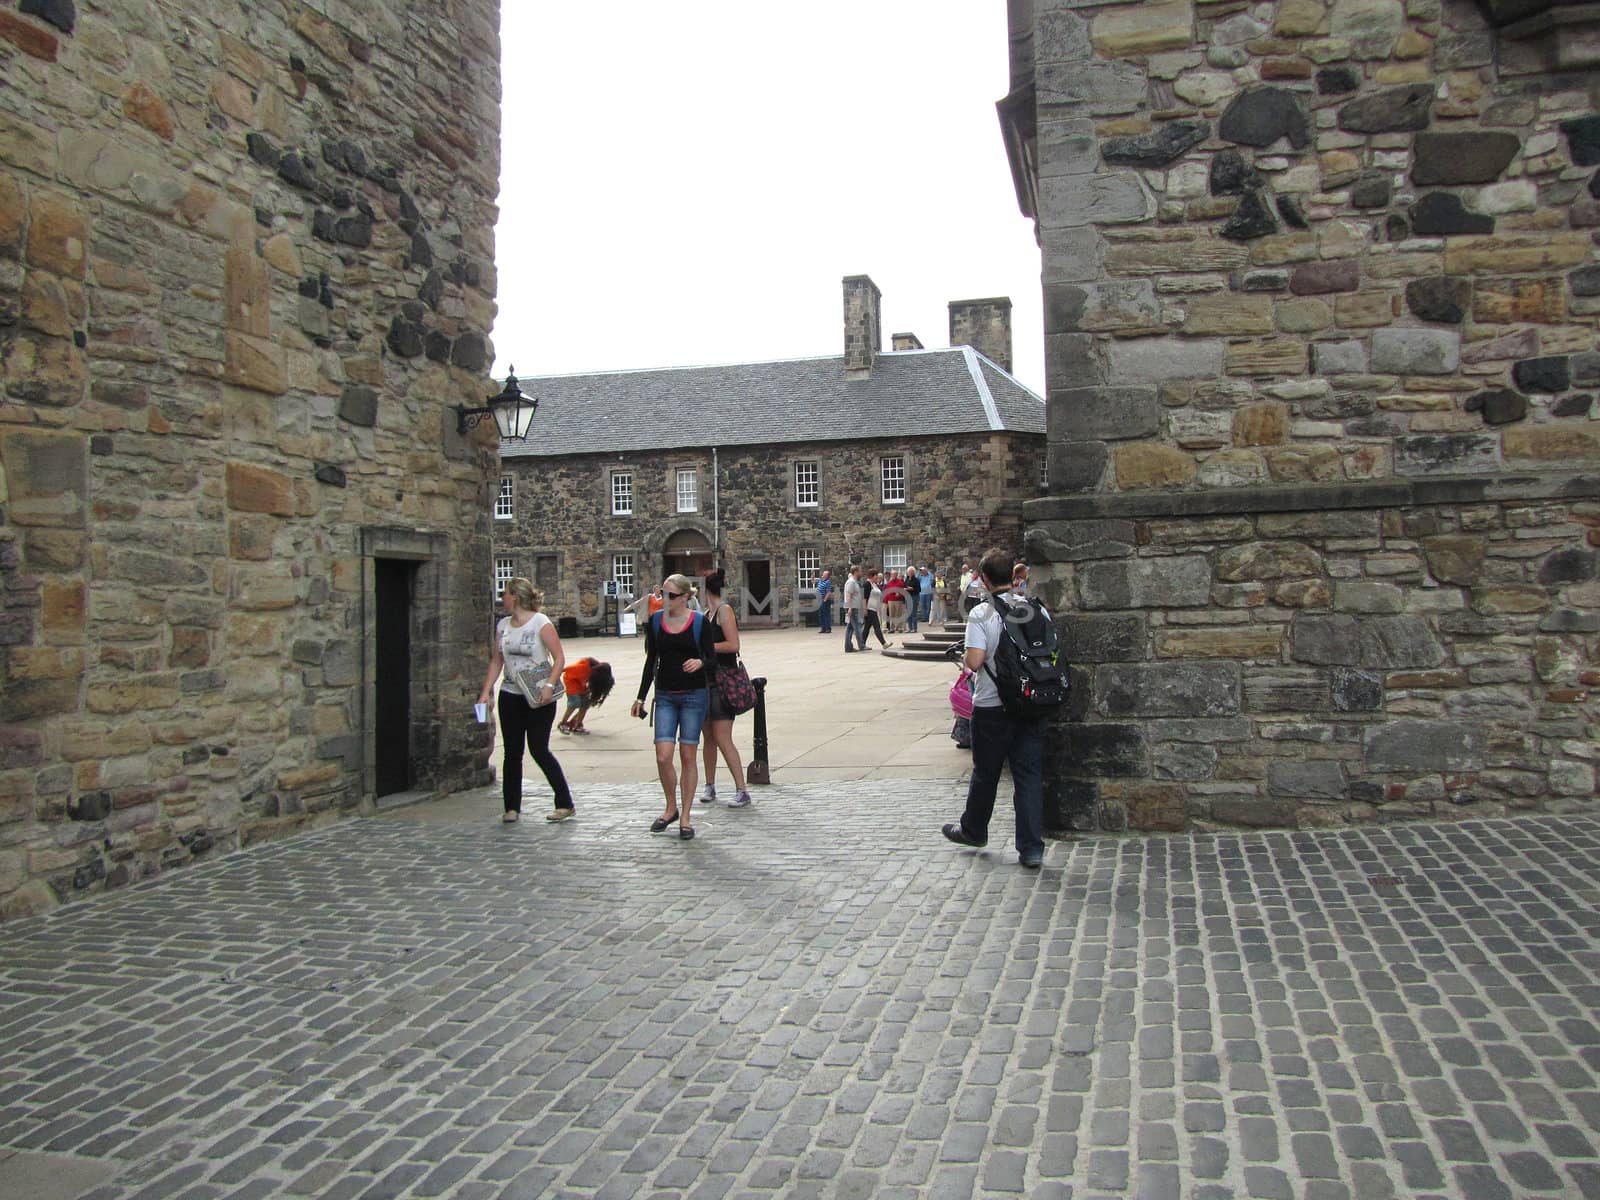 Unidentified visitors at Edinburgh Castle on September 4, 2010 i by green308